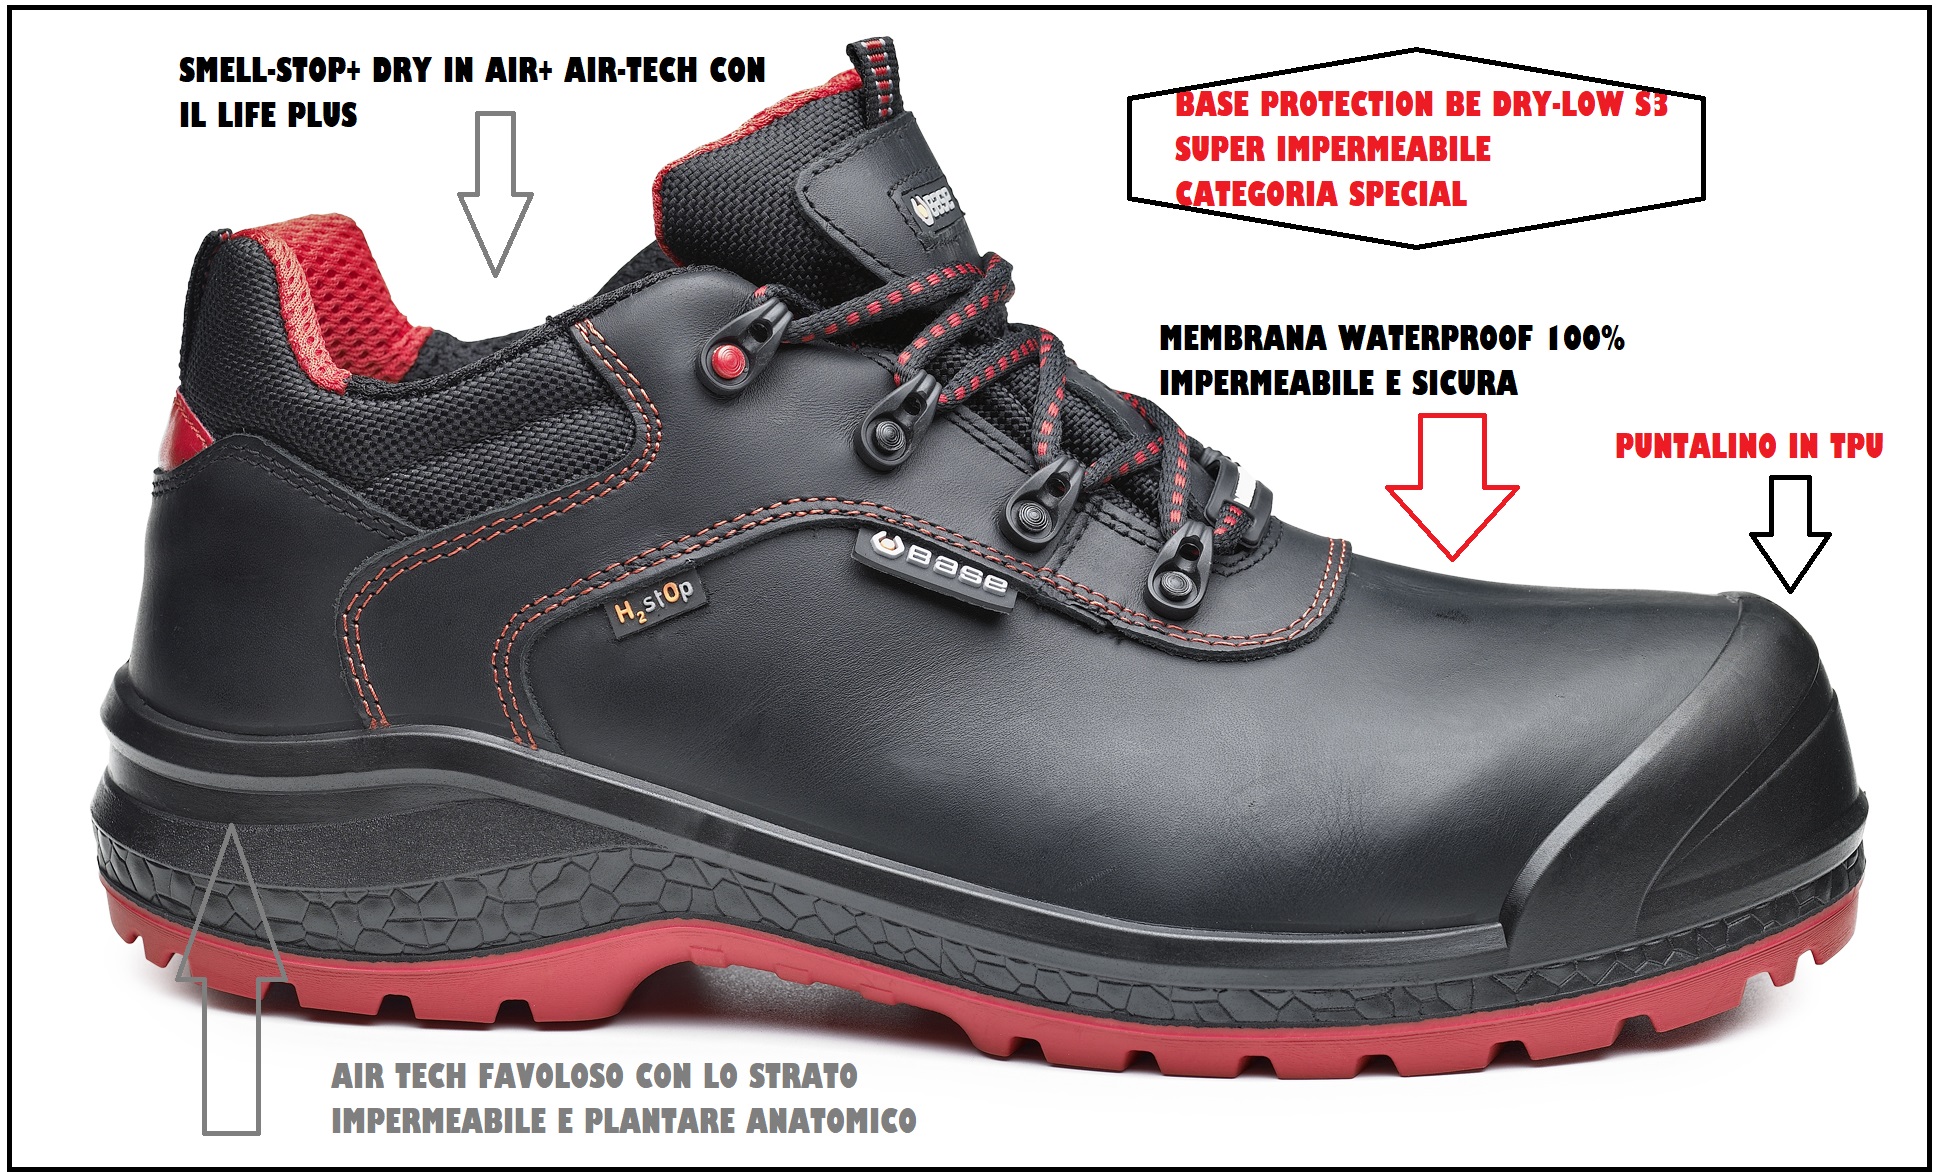 SCARPE BASE PROTECTION BE DRY LOW